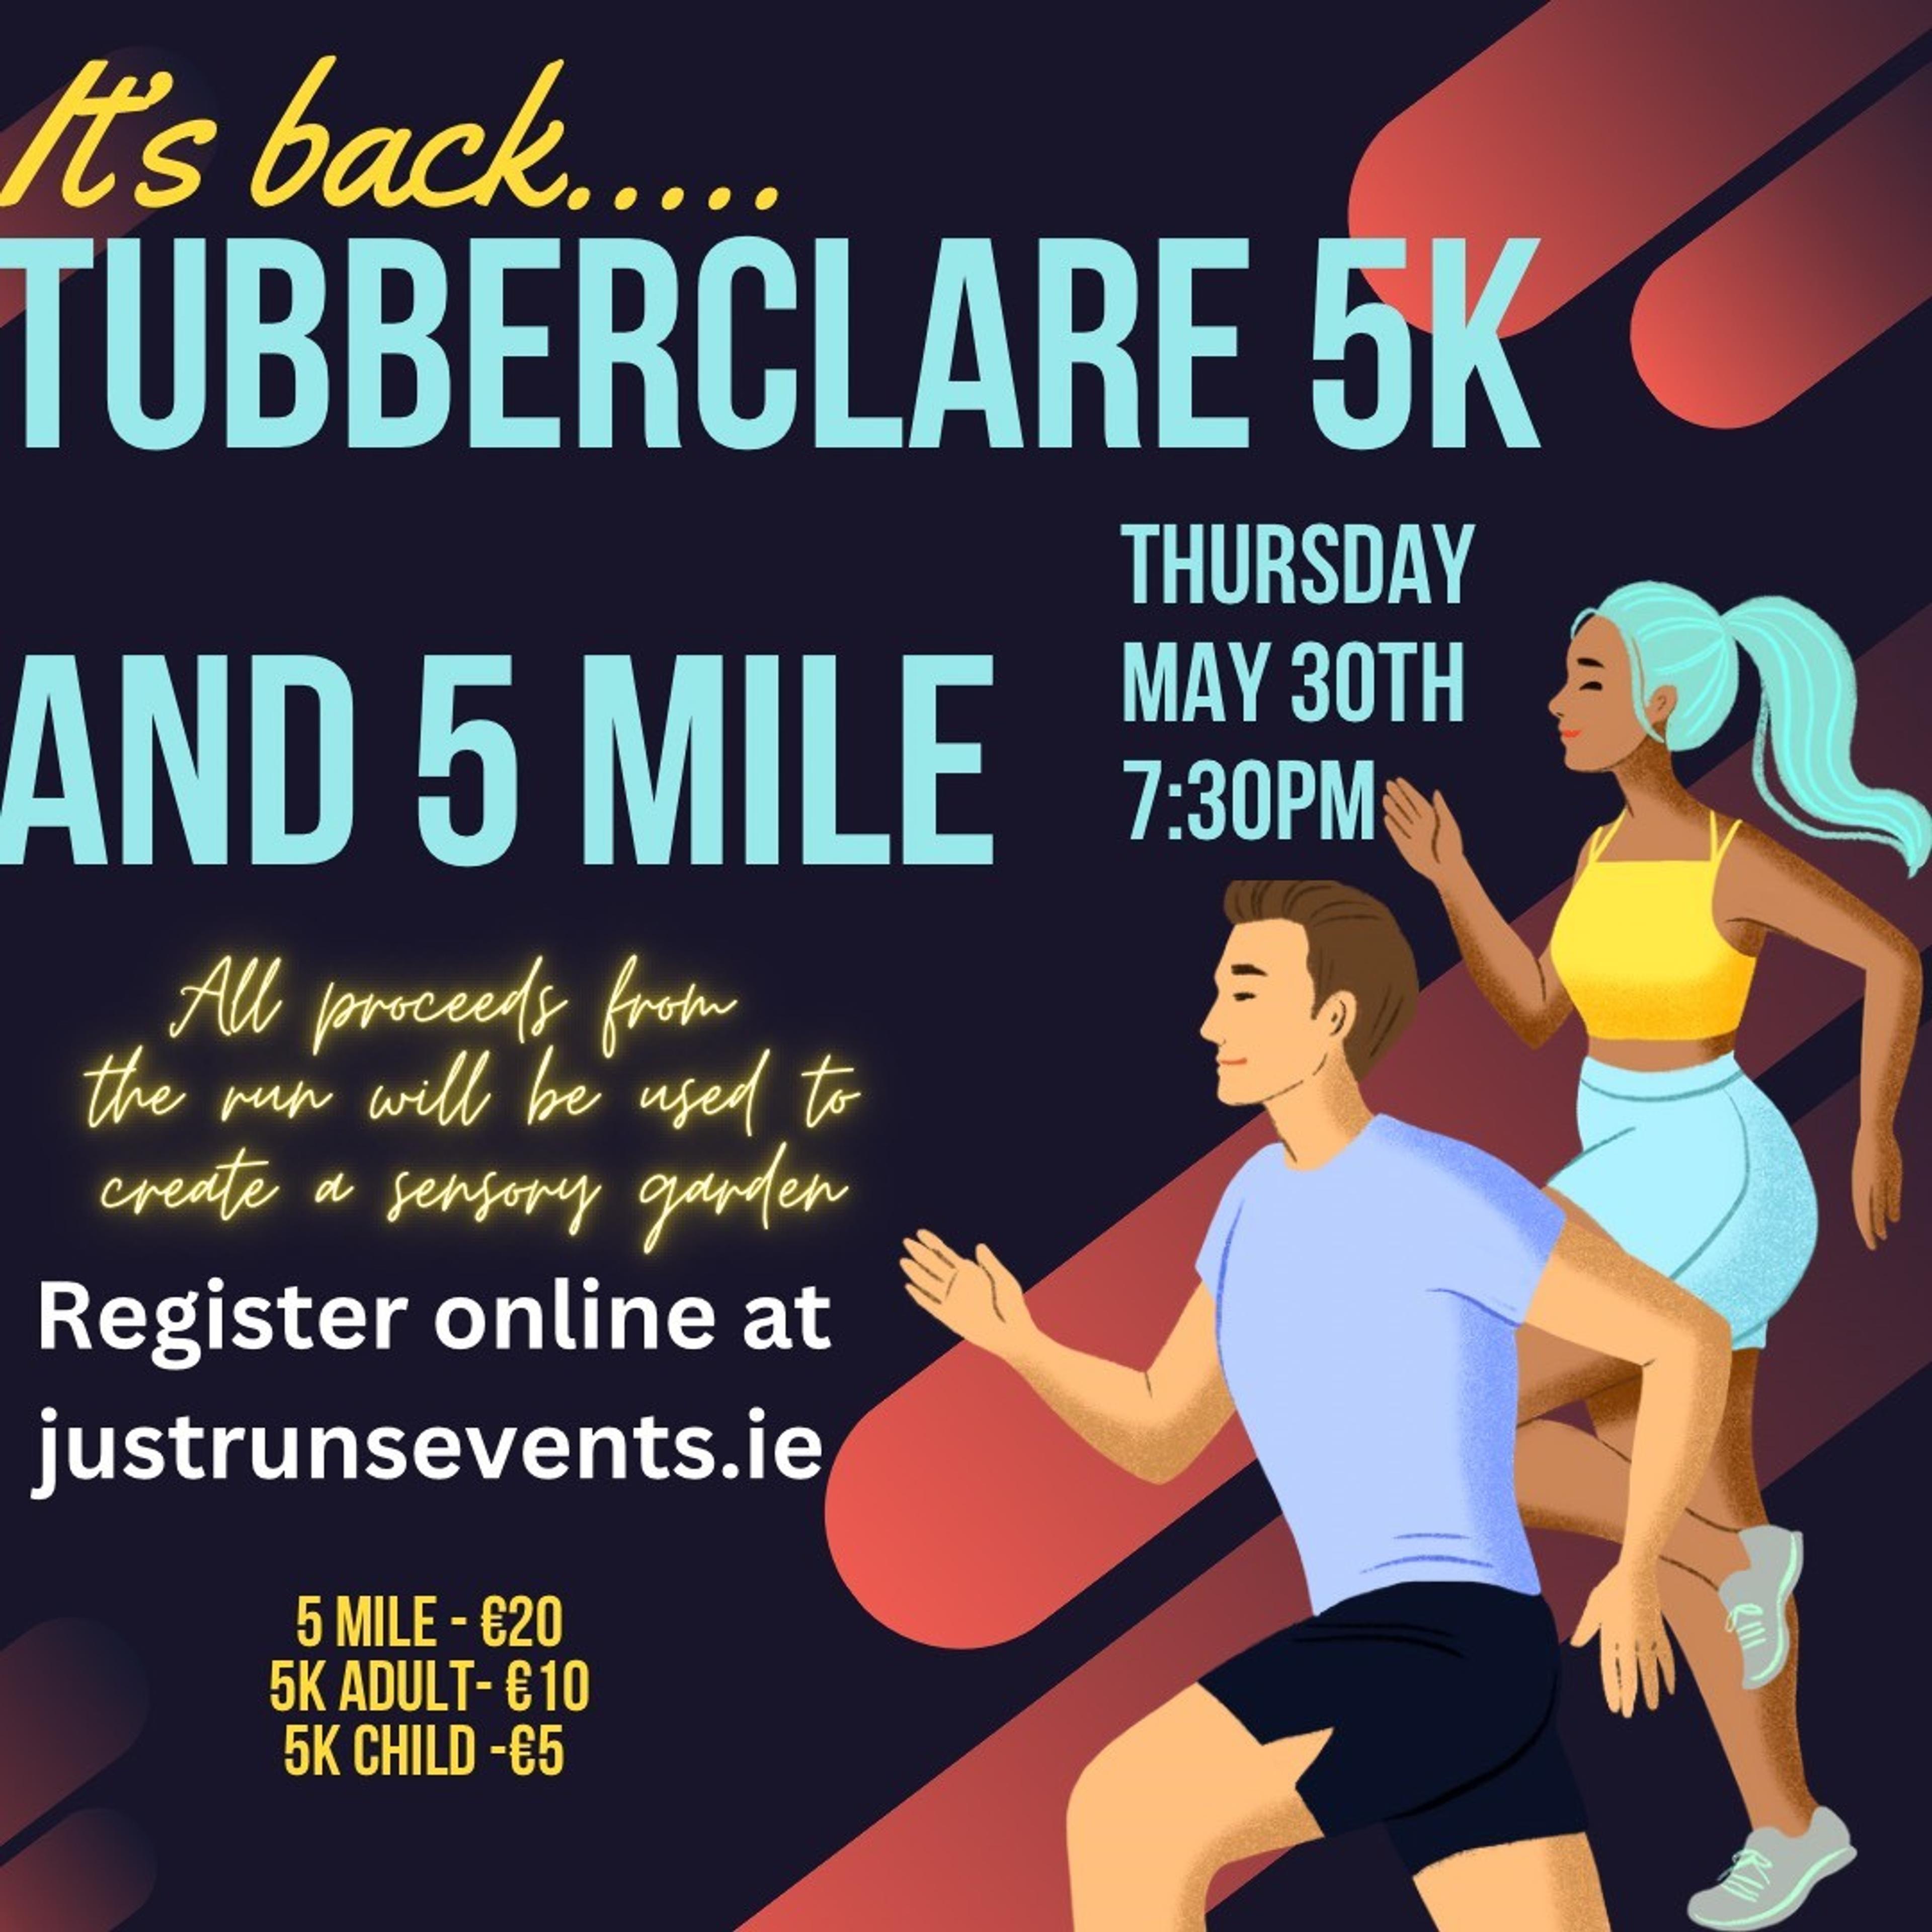 Featured Event - Tubberclare 5K and 5 Mile